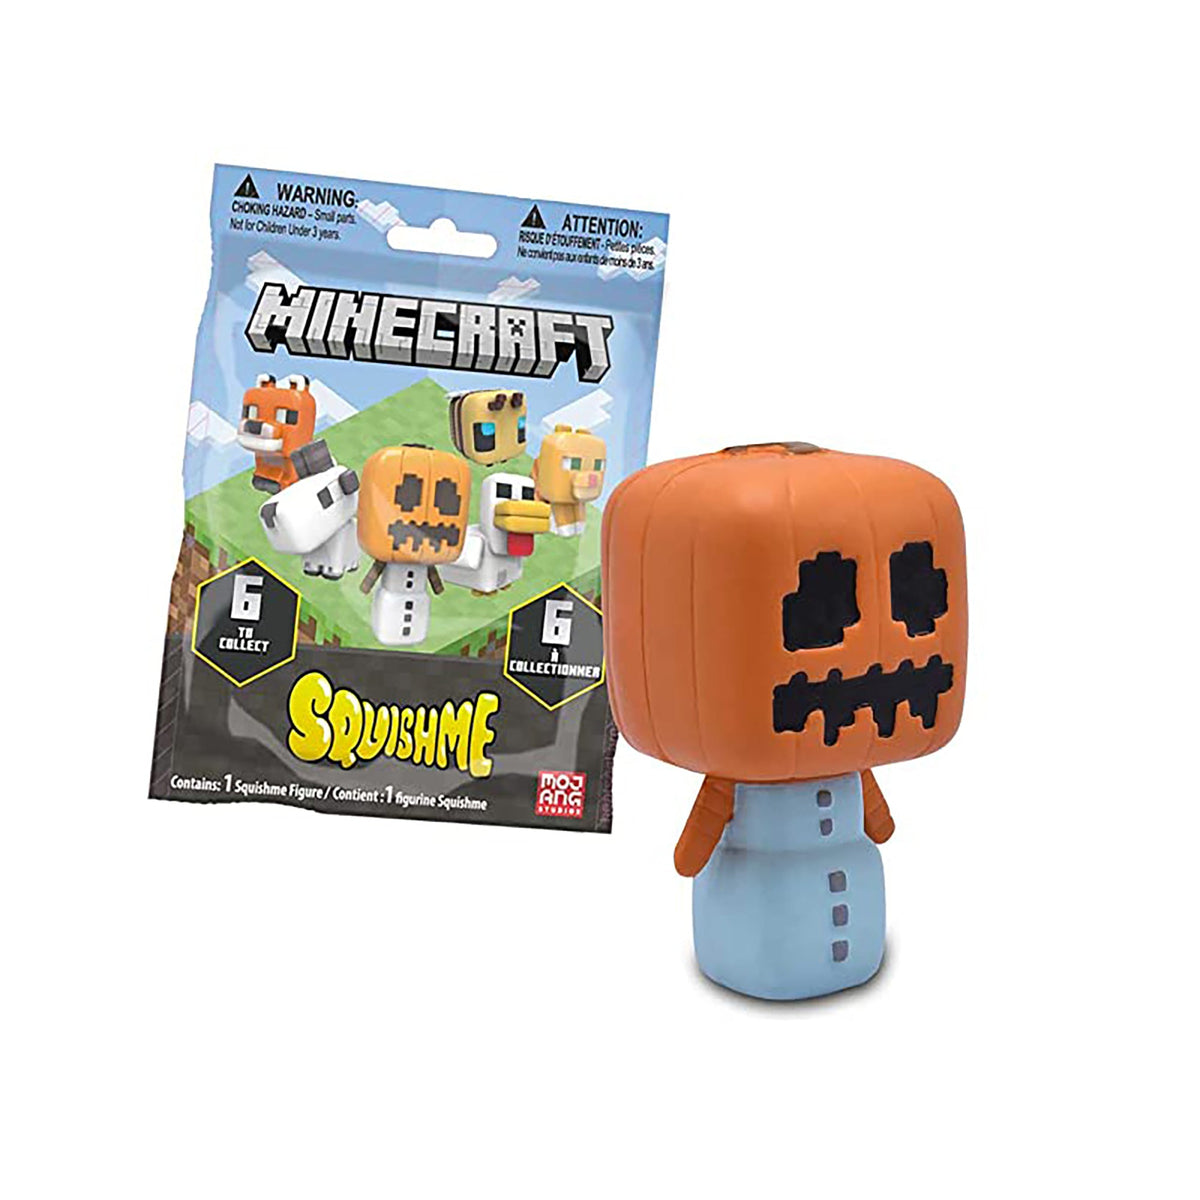 RED PLANET GROUP Toys & Games Minecraft Squishme, Assortment, 1 Count